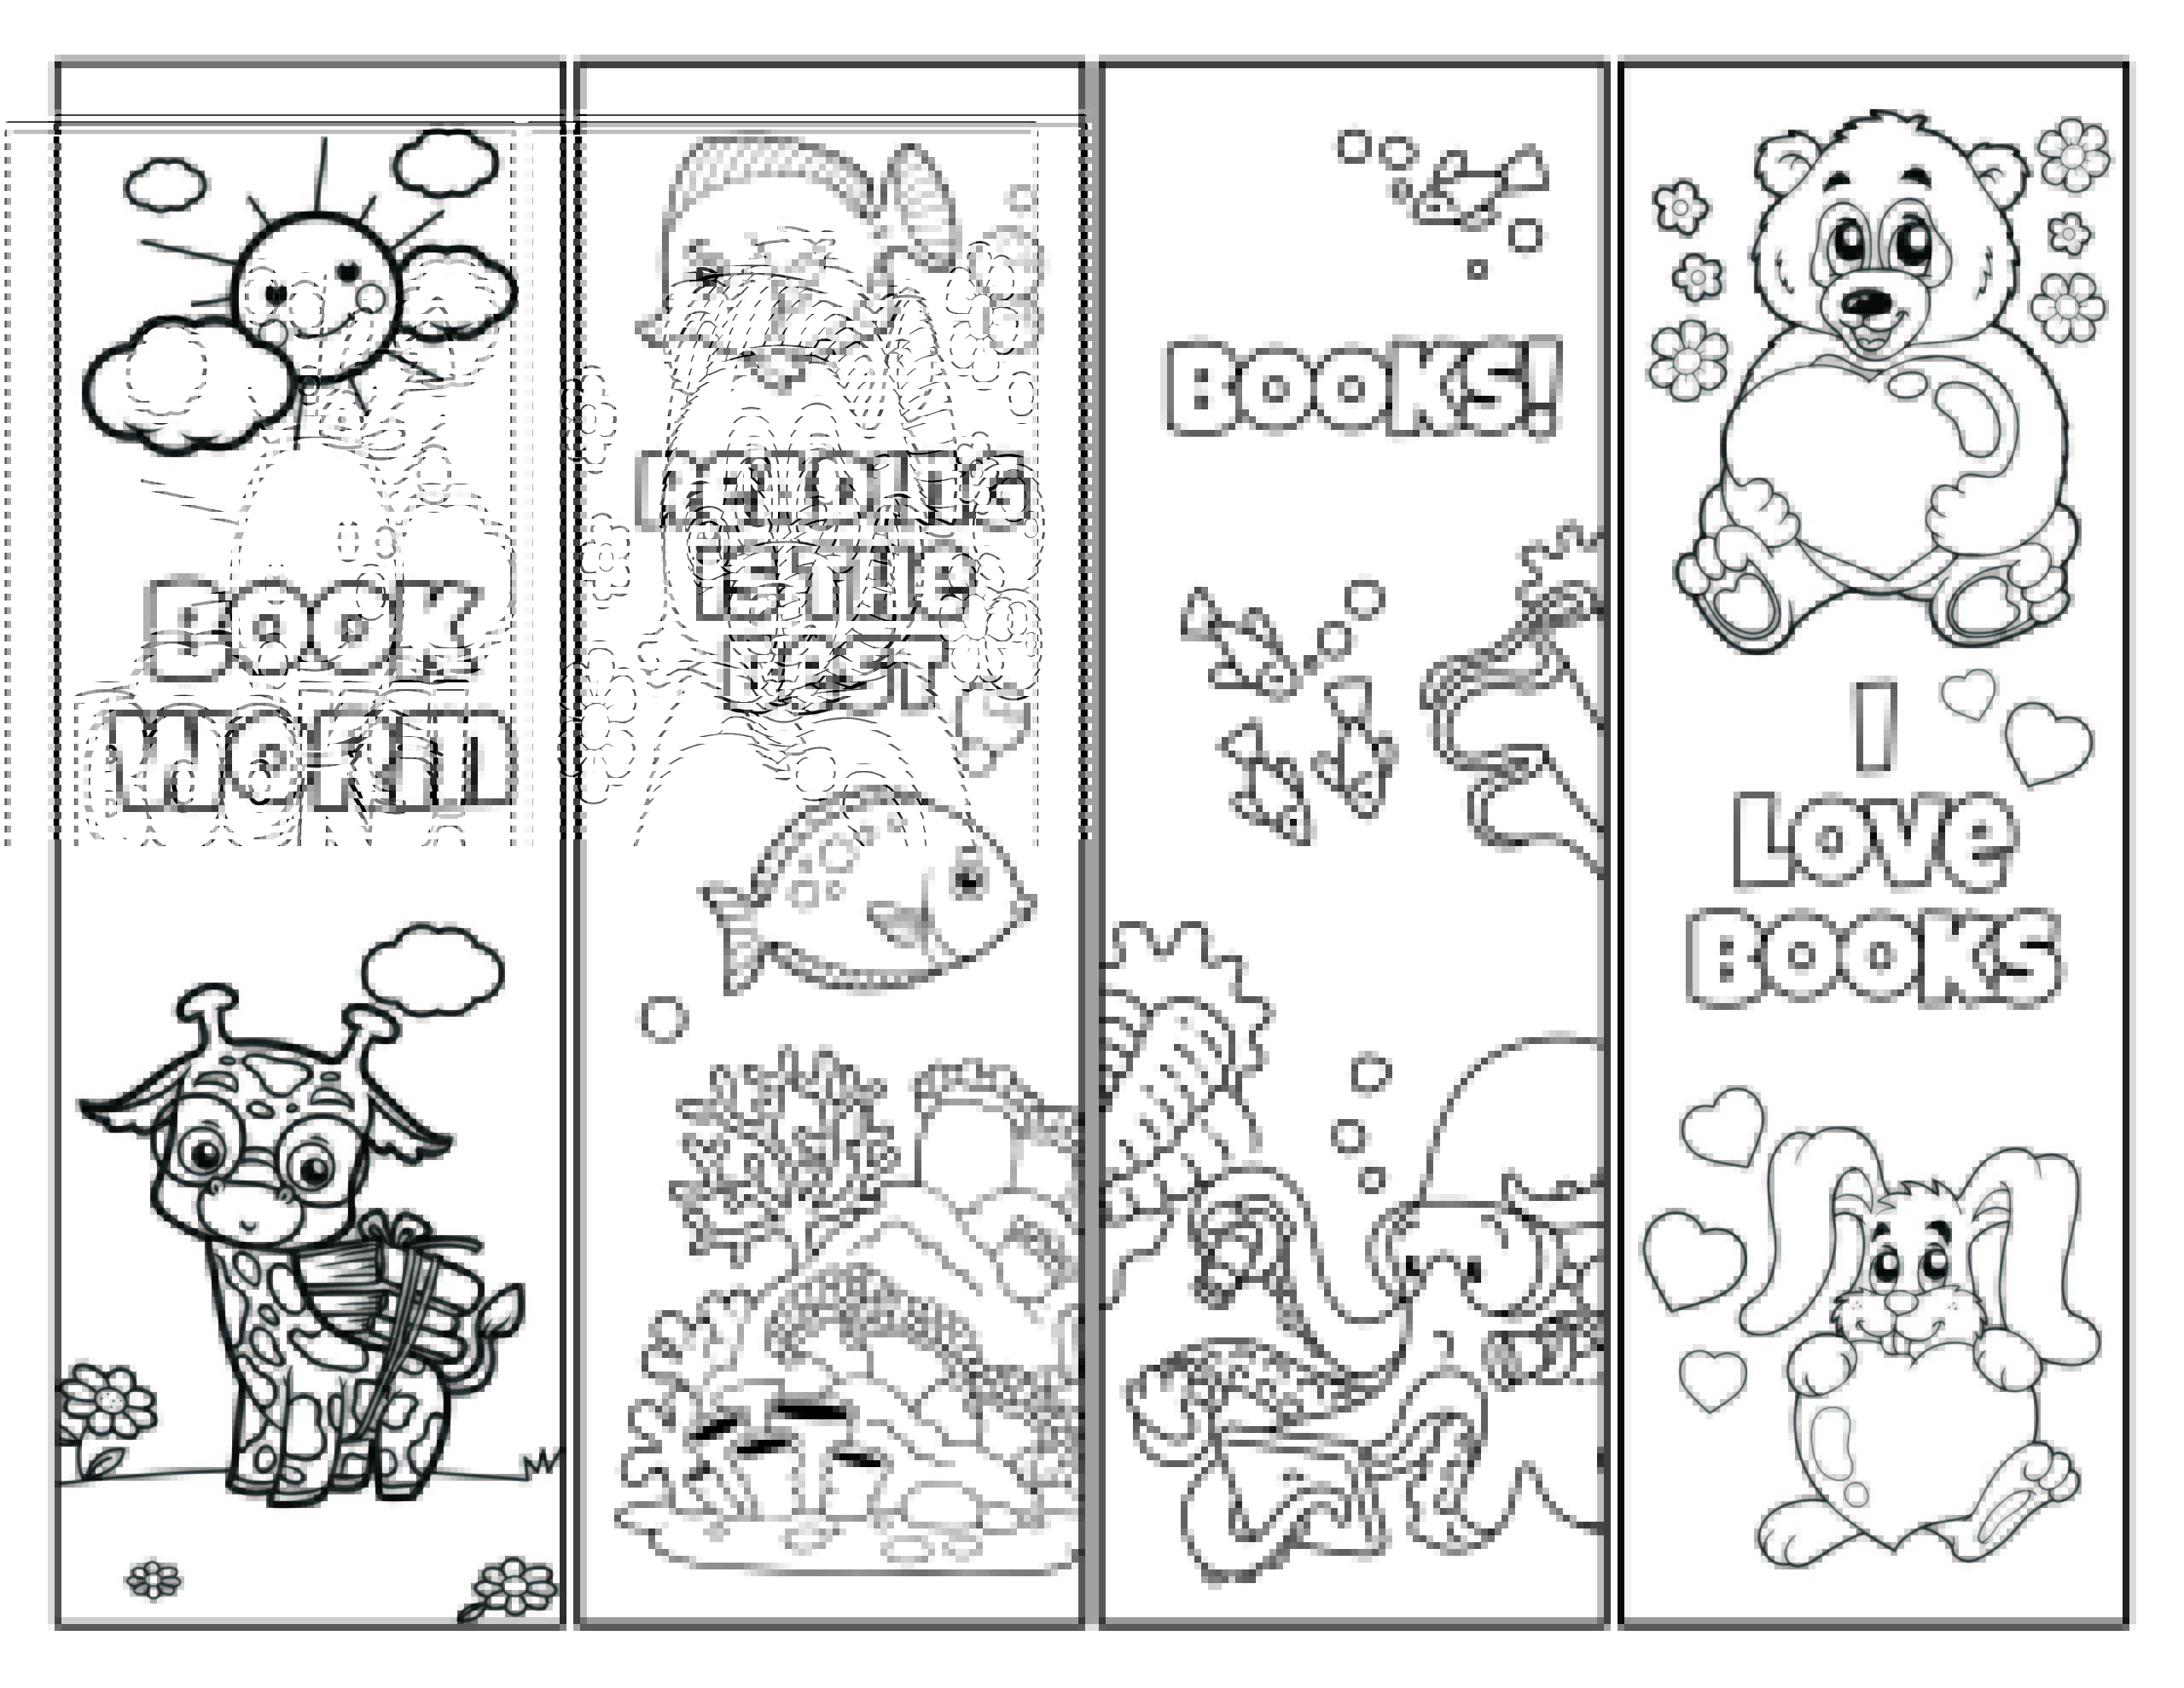 Printable Coloring Bookmarks For Kids_93044